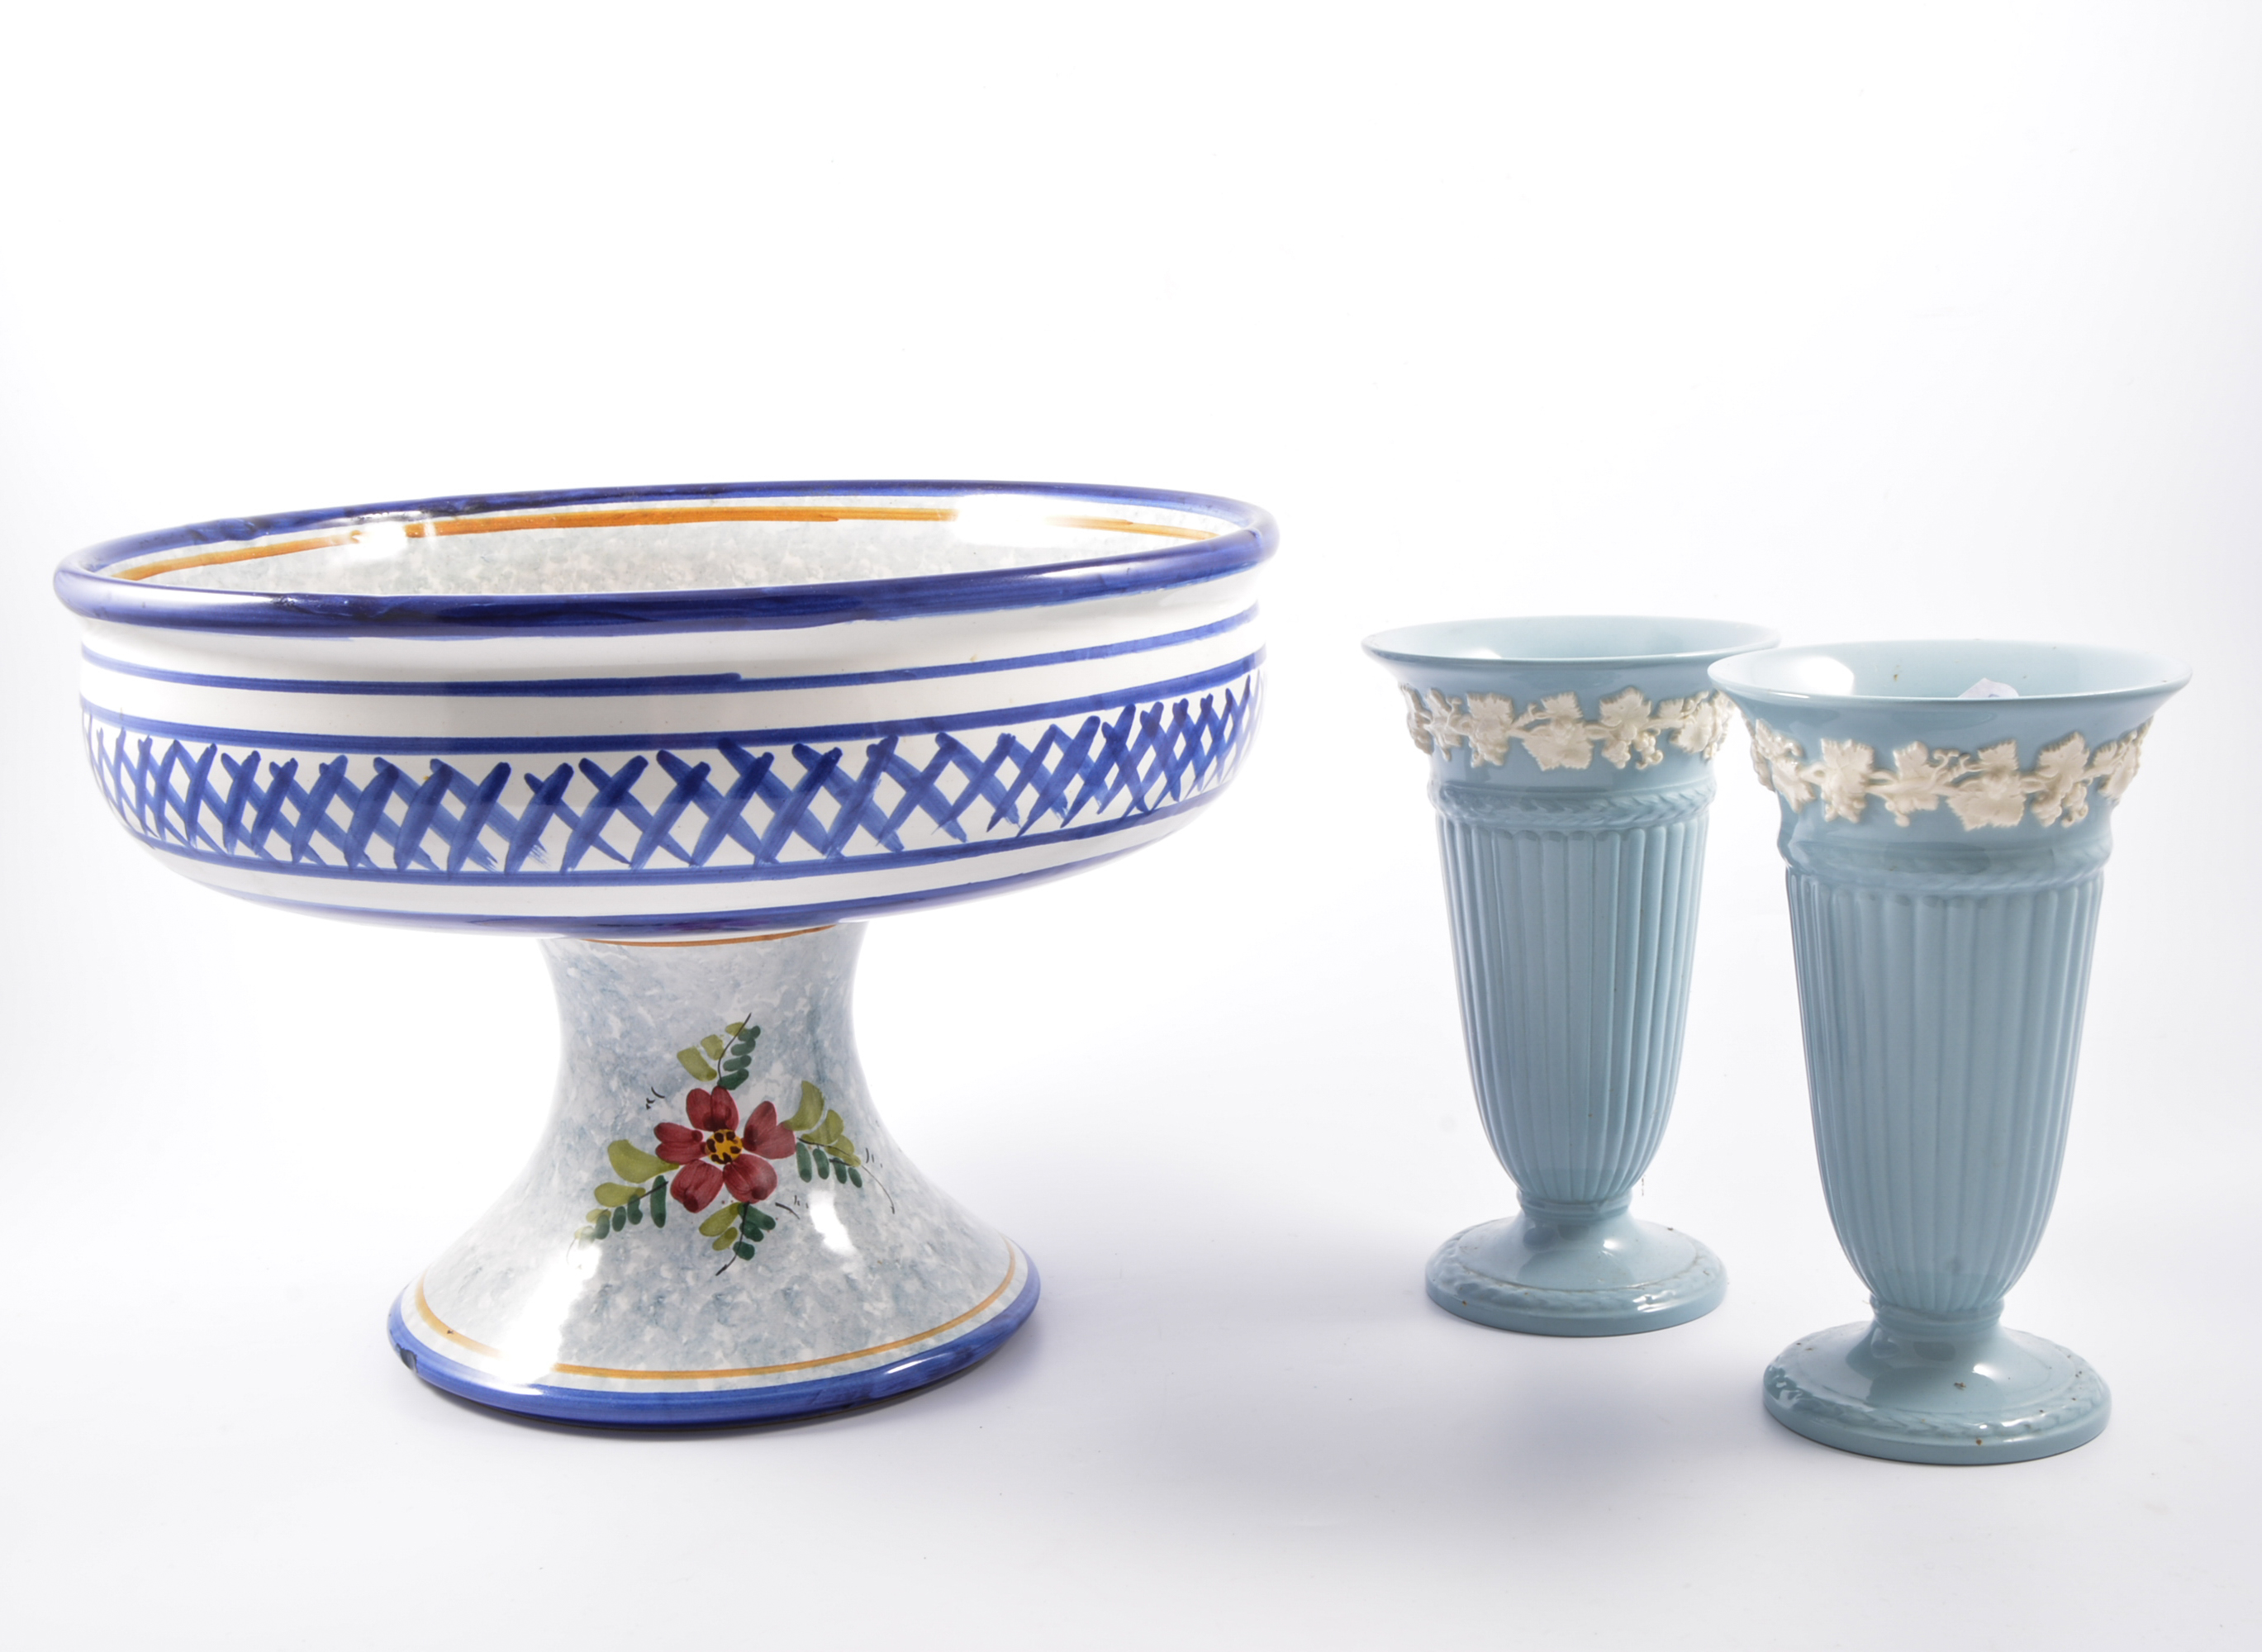 Pair of Wedgewood Queens ware vases, along with other decorative ceramics.